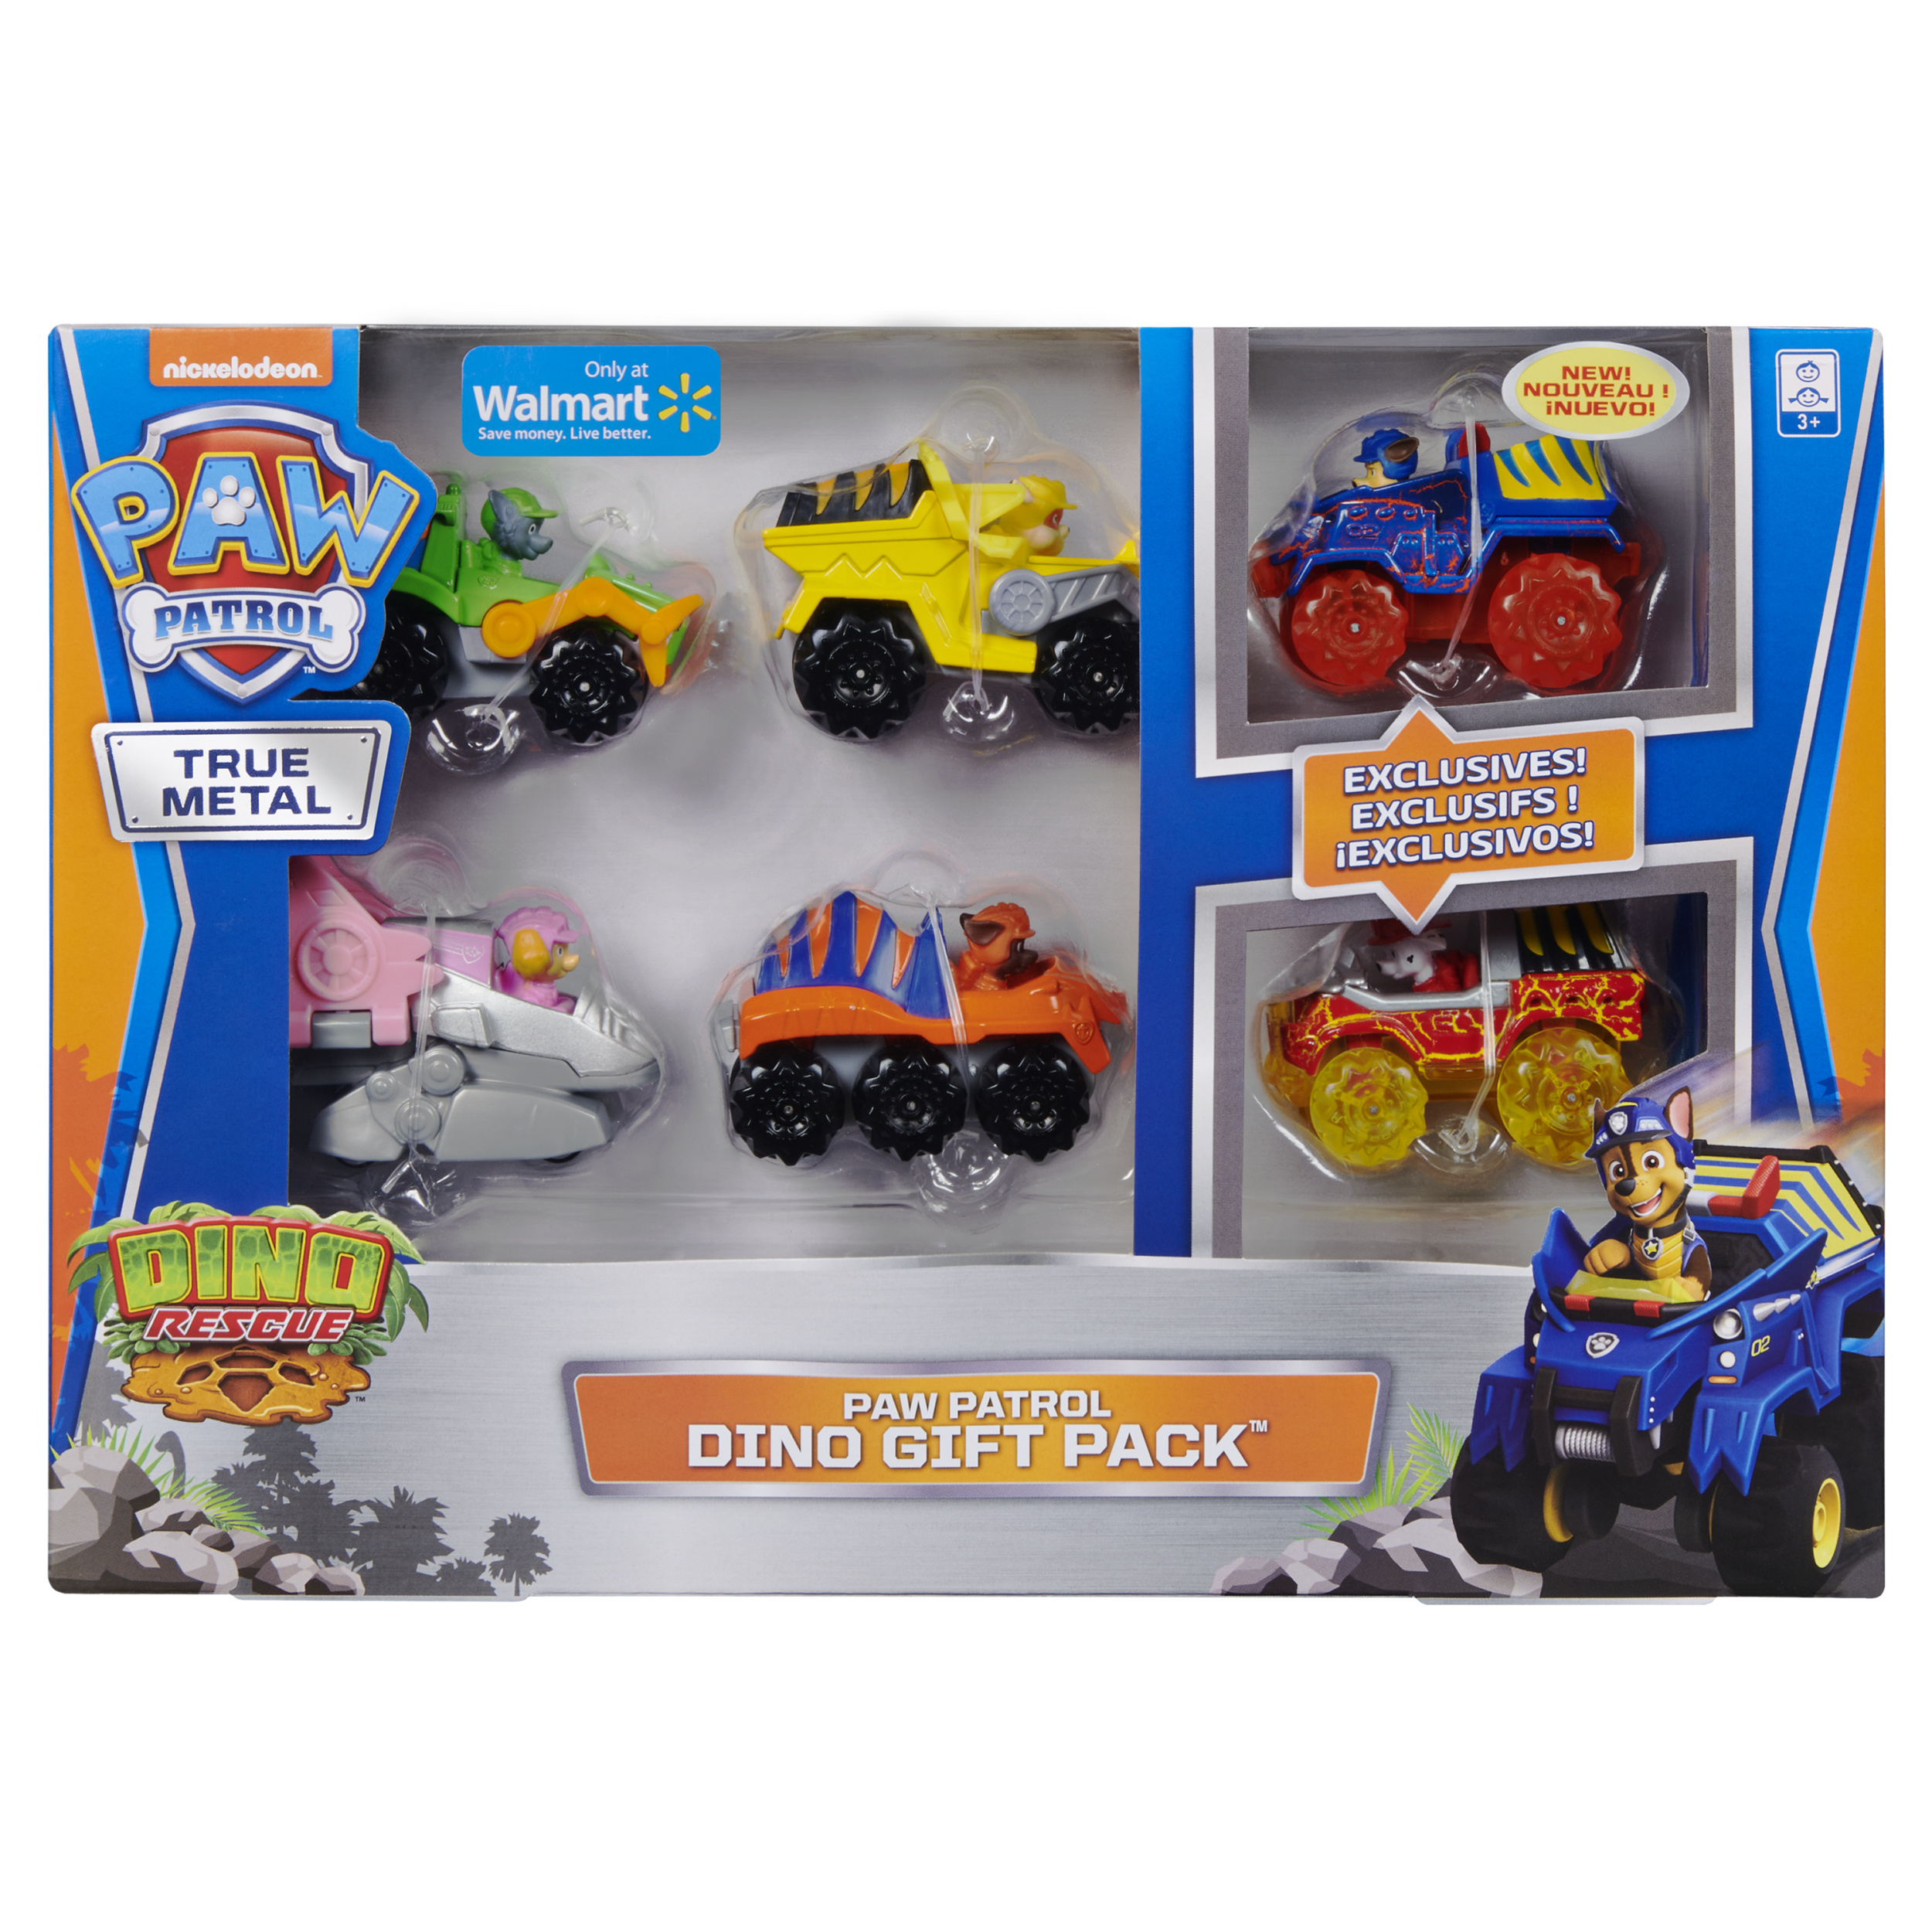 6-Piece Paw Patrol True Metal Dino Rescue Gift Pack of Collectible Die-Cast Vehicles $14 at Walmart w/ Free Store Pickup or Free S&H on $35+